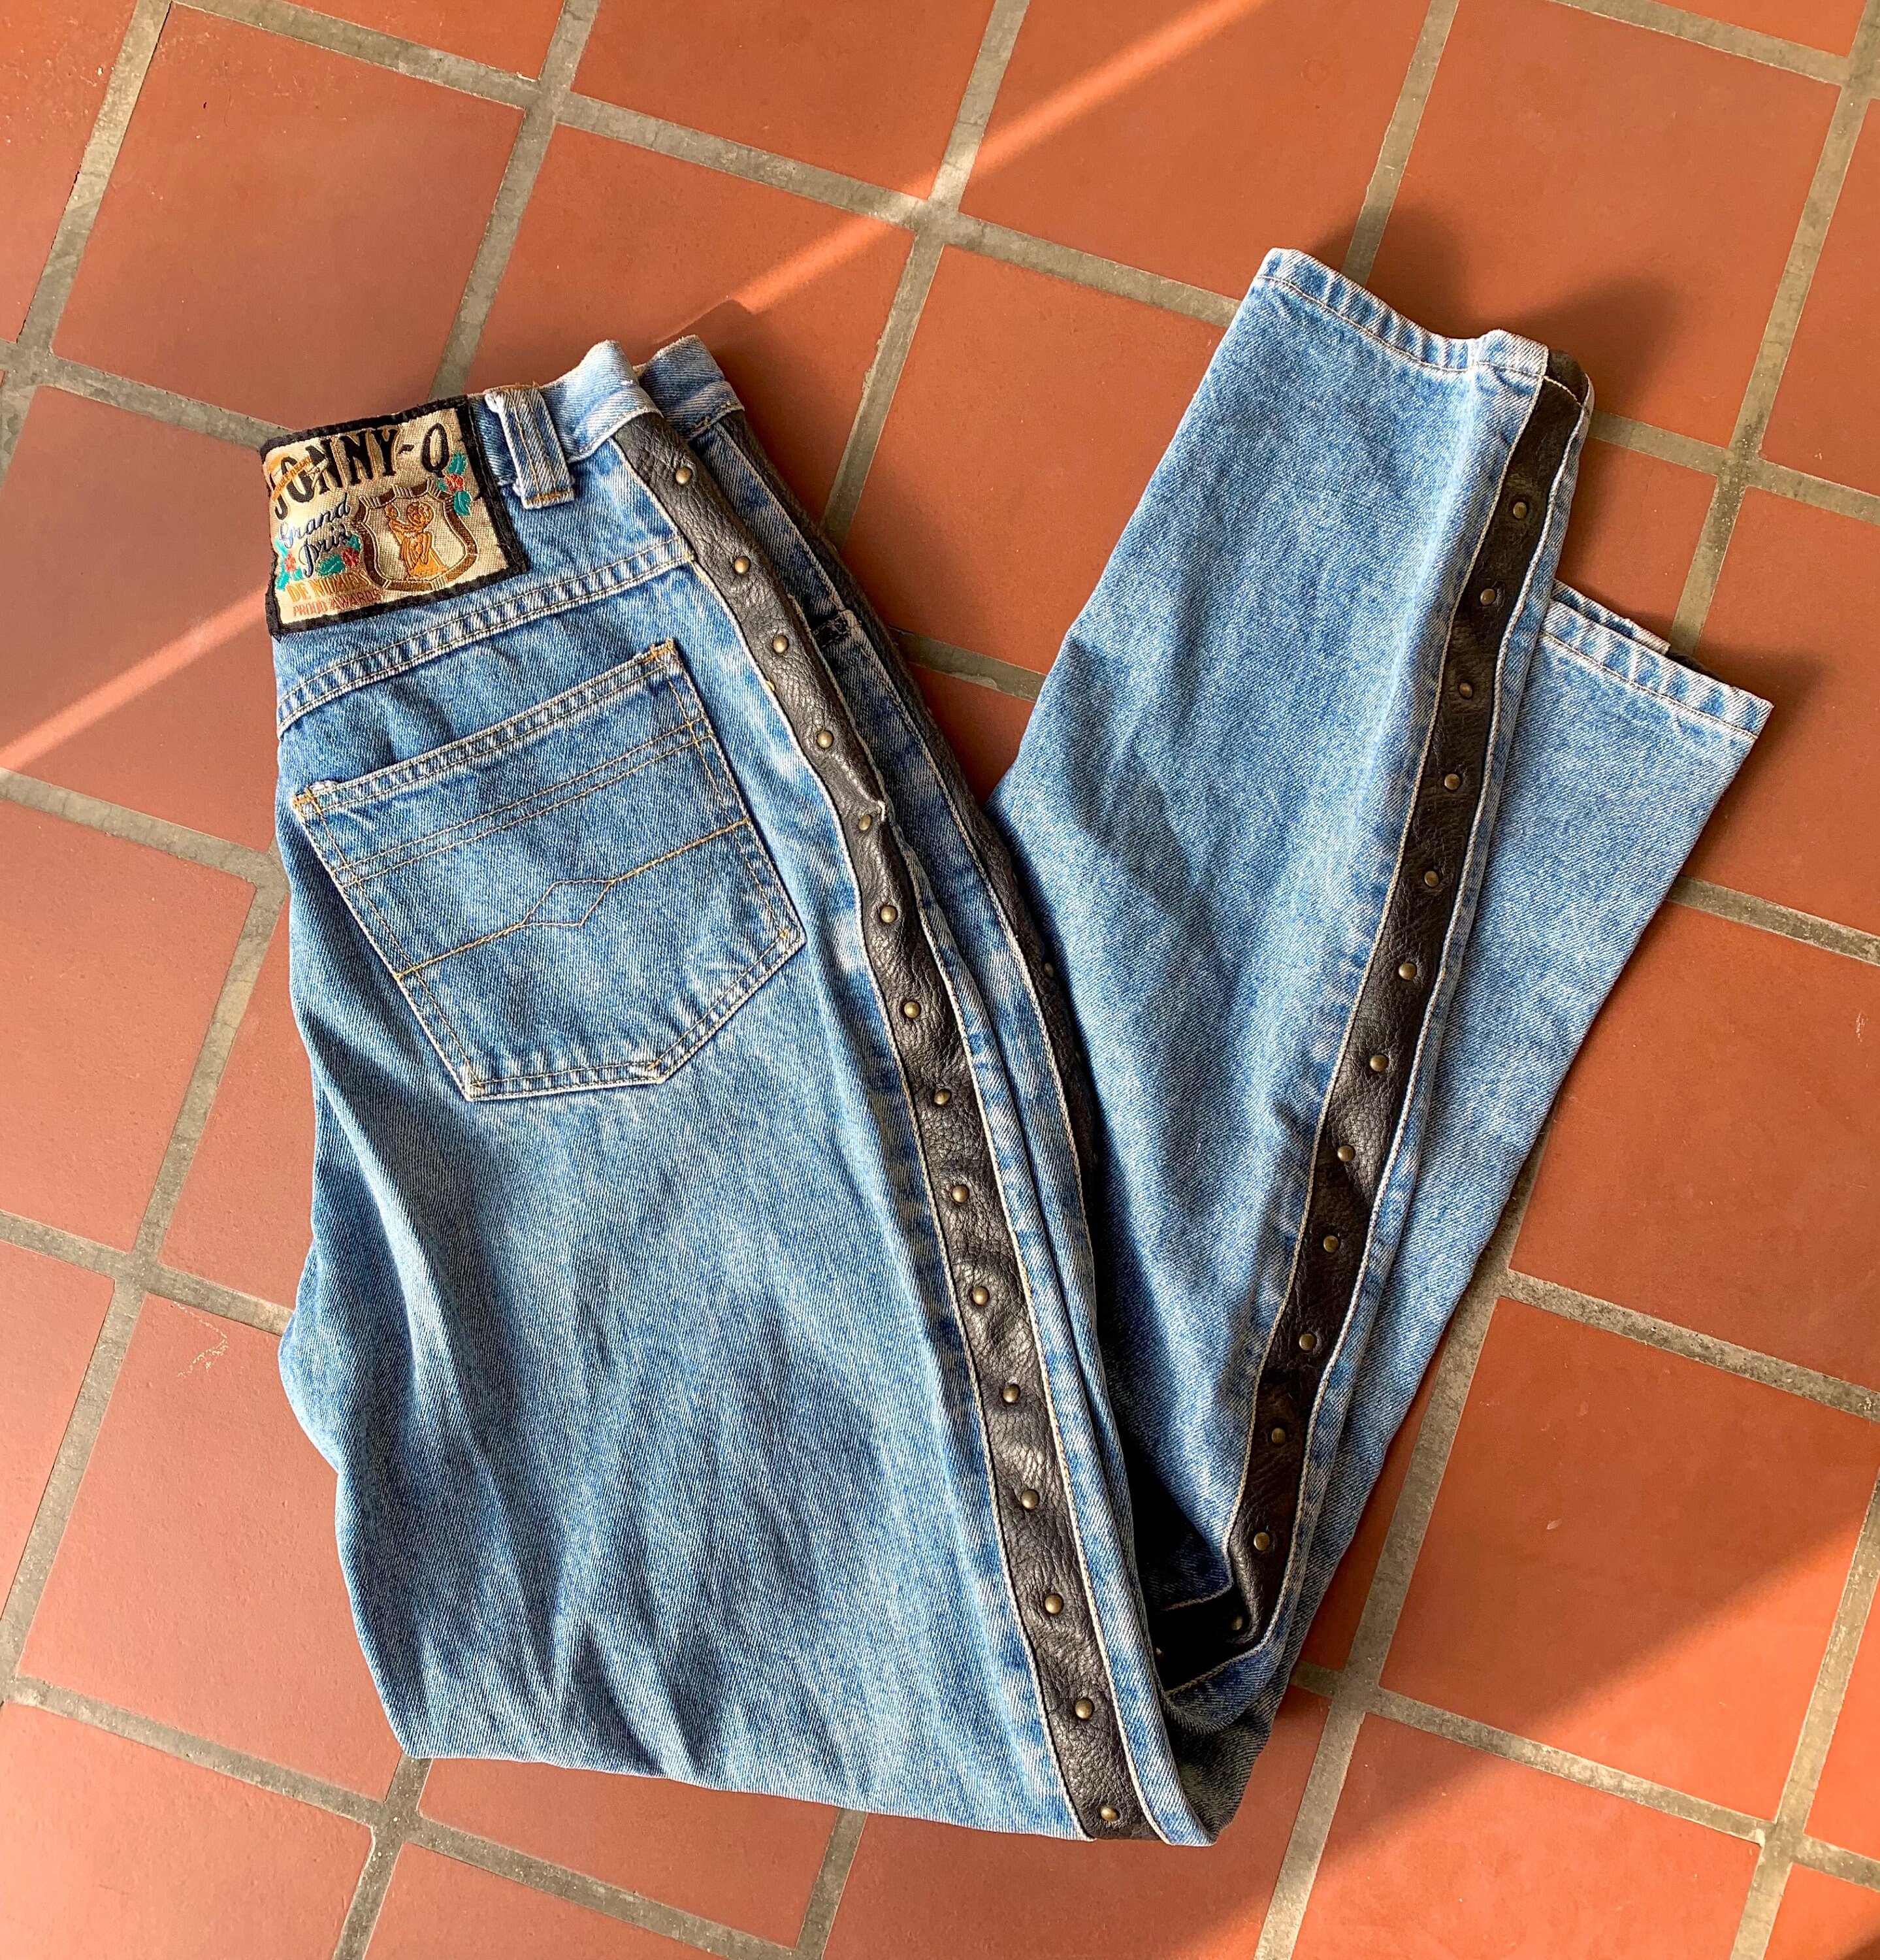 Sinis Ved charter Size 28 Vintage Jonny-q Jeans W/ Leather and Stud Leg - Etsy